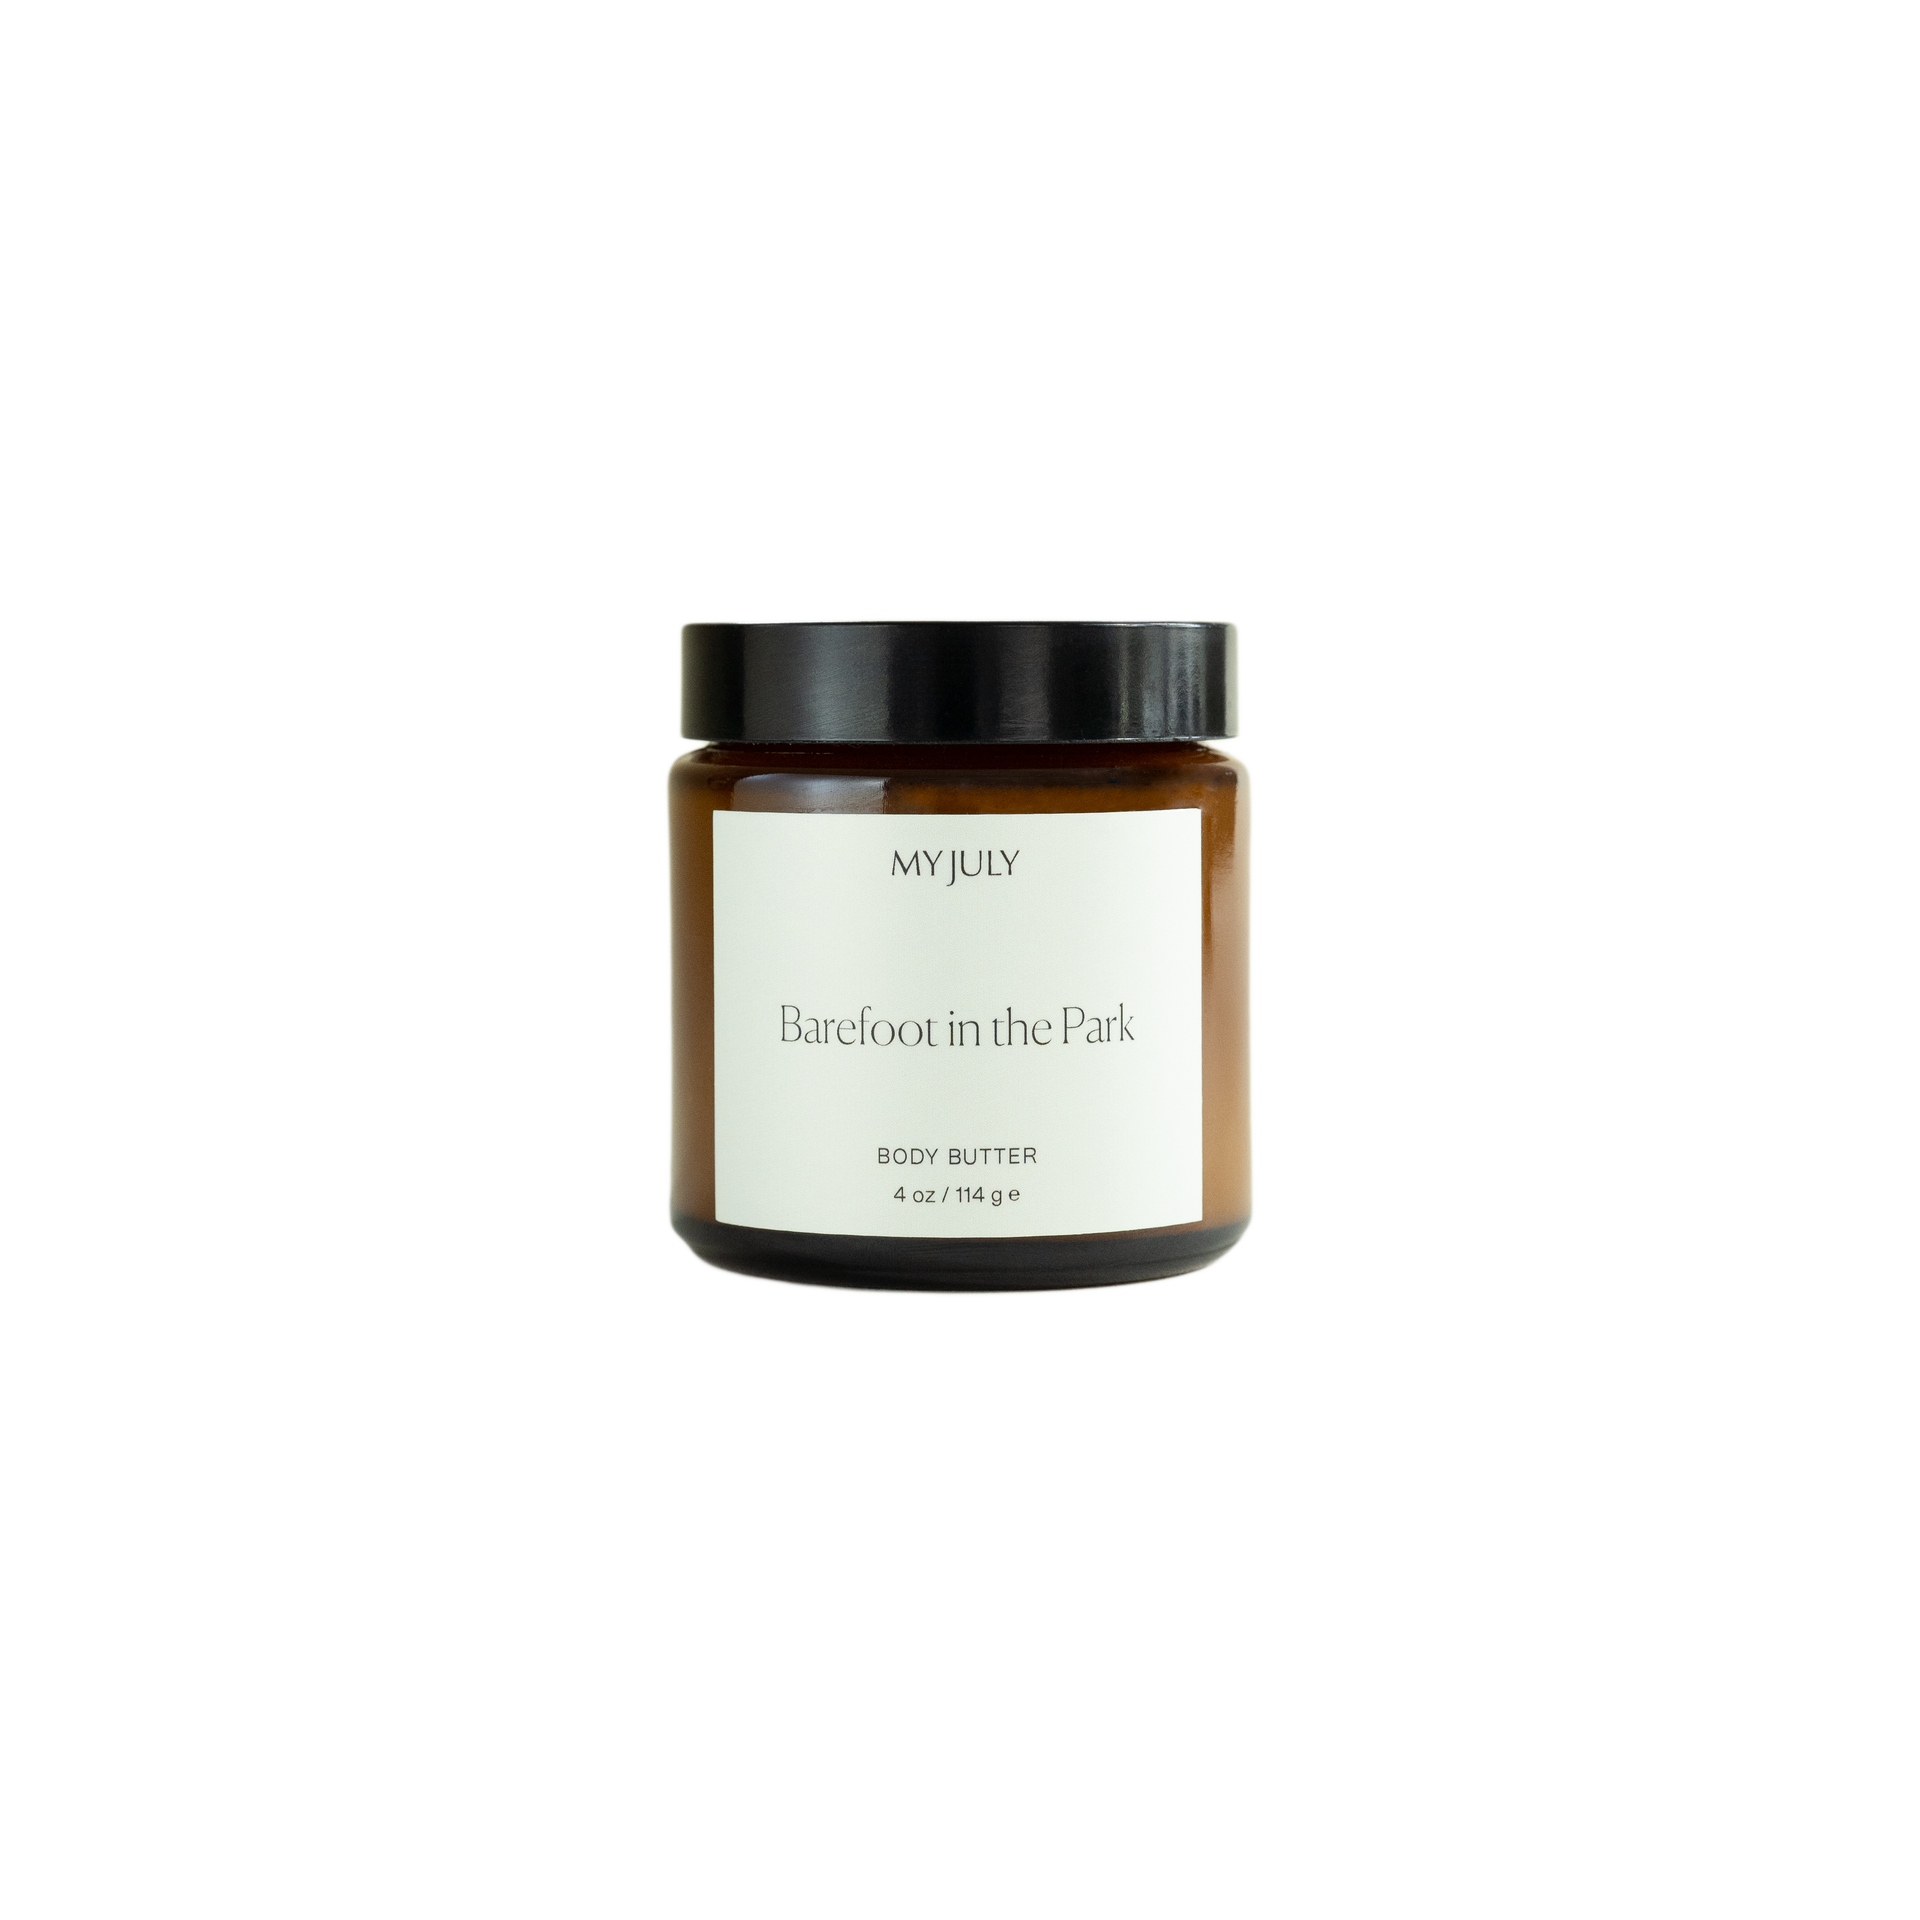 Barefoot in the Park Body Butter